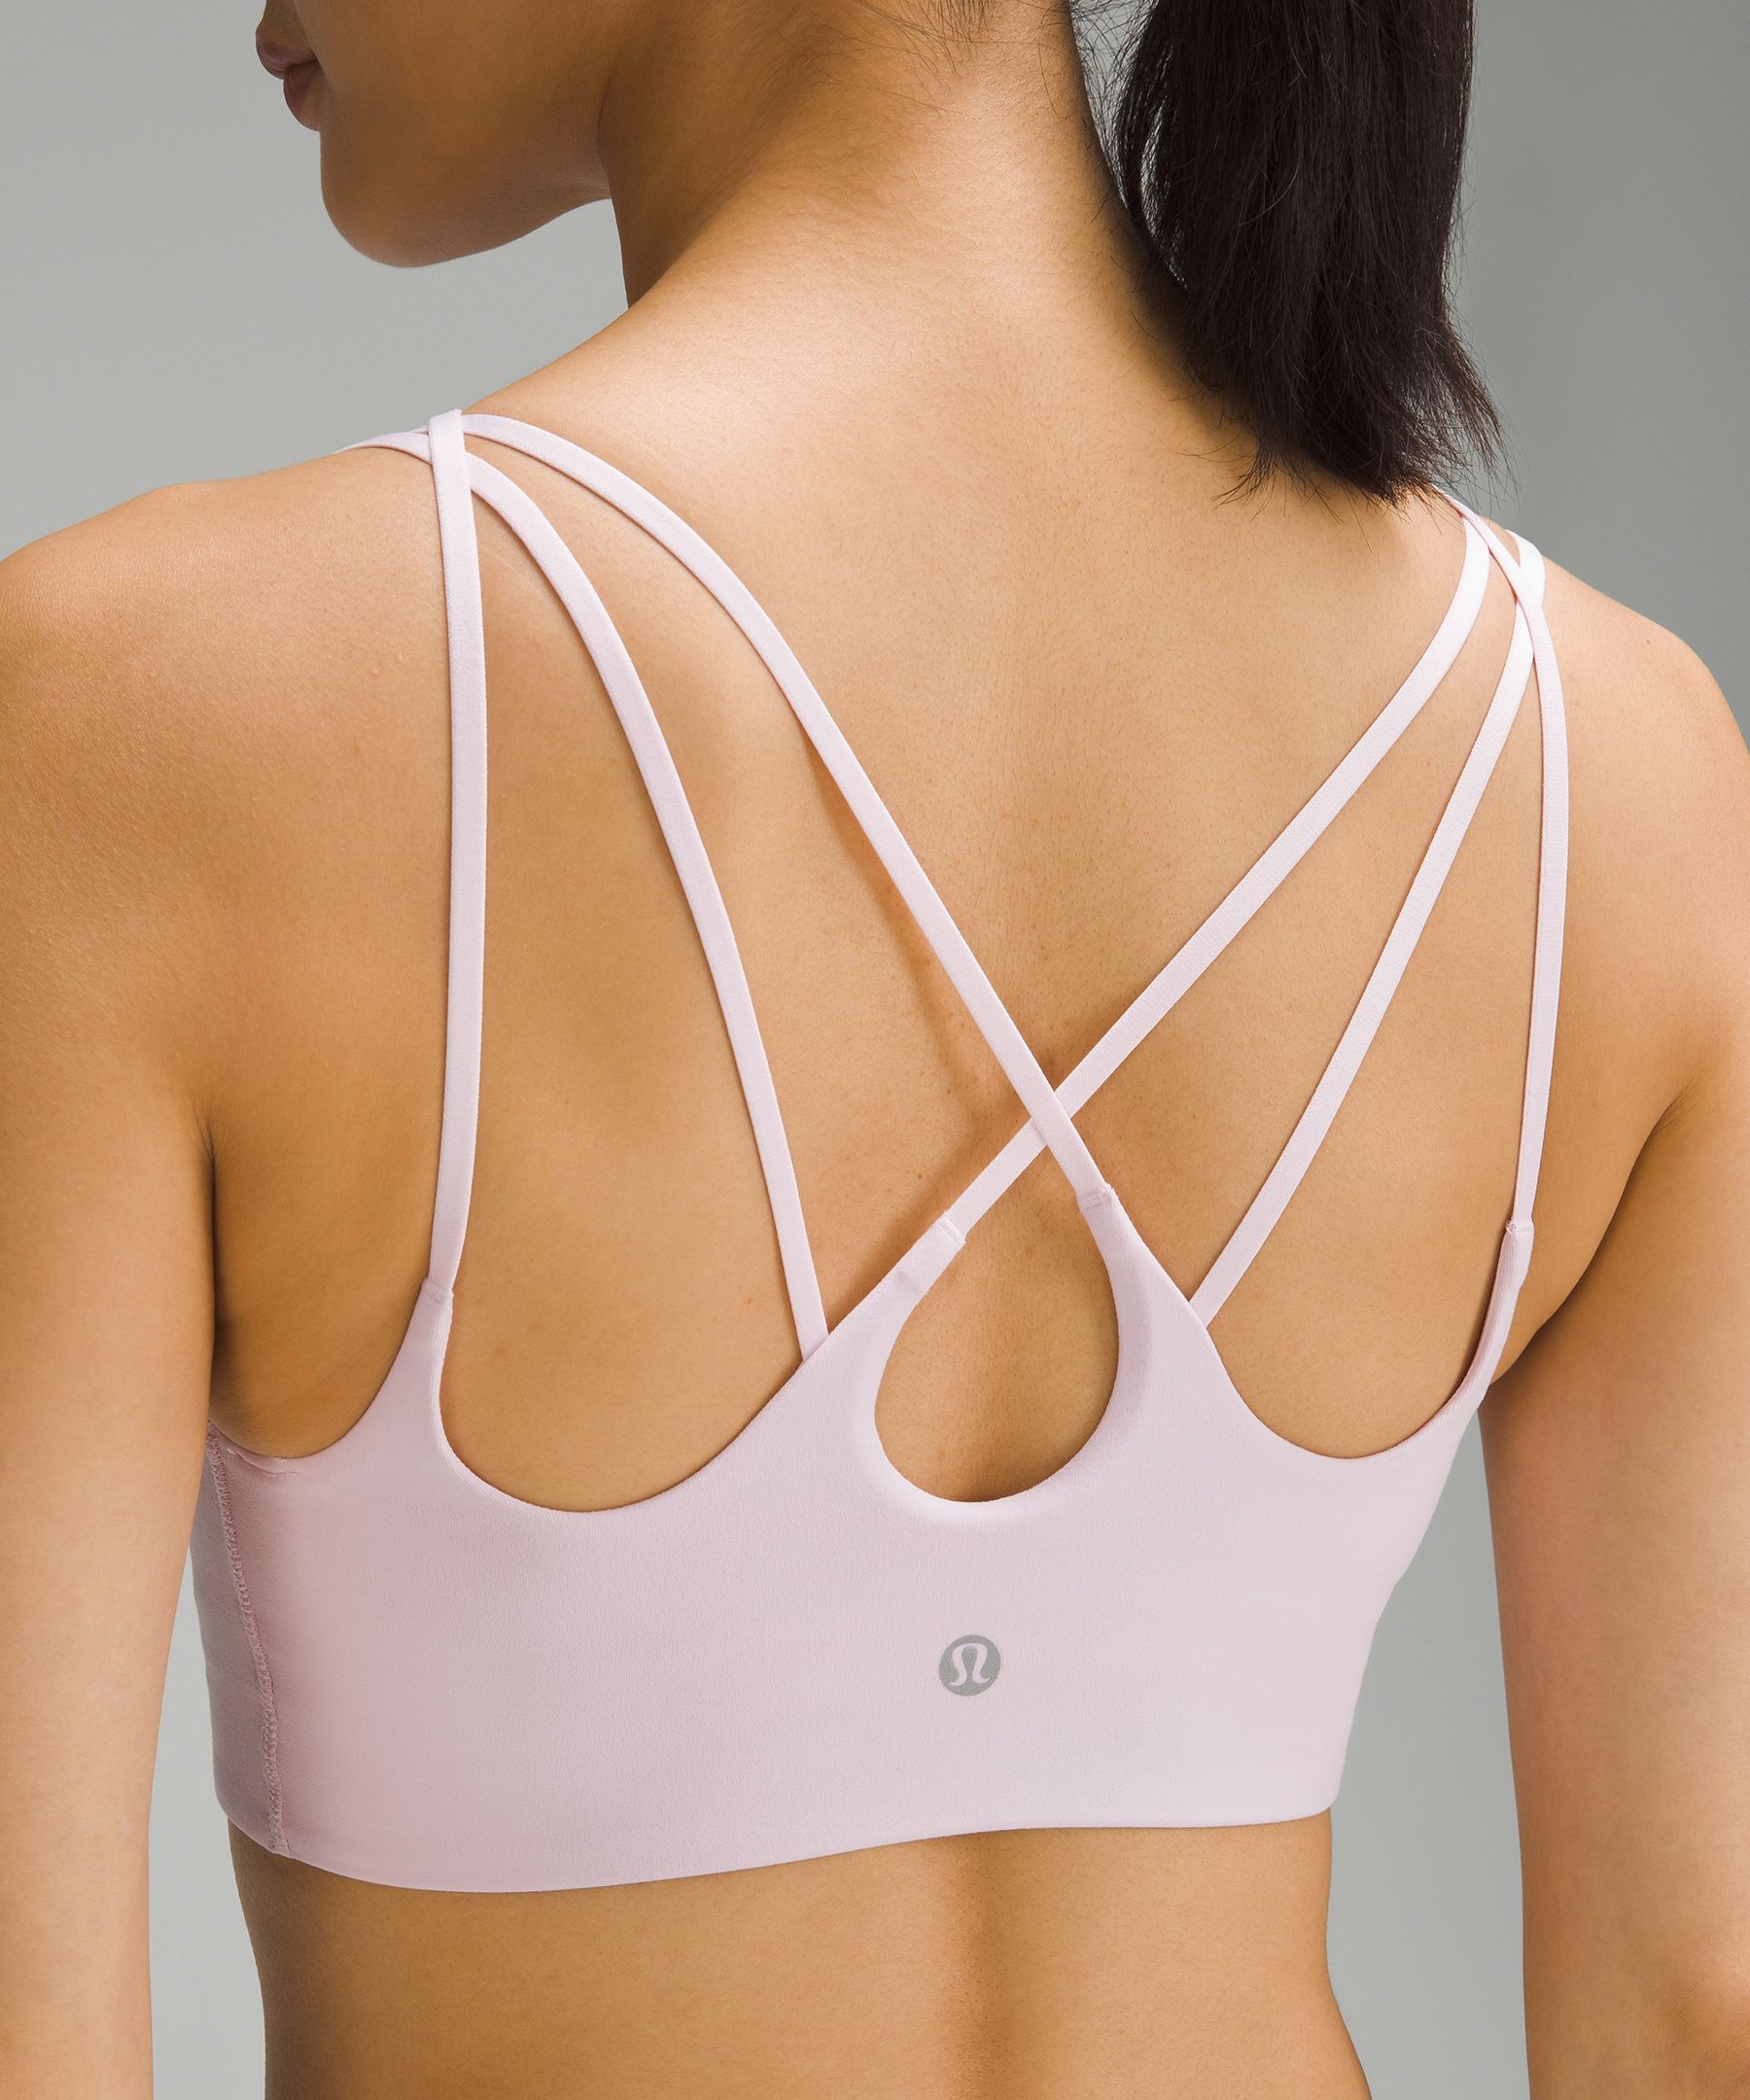 LU 47 Ribbed Align Push Up Sports Bra Shirt For Women Shakeproof, Adjustable  Strap, Red Yoga Clothes, Fitness Tank, Sexy Lady Tops From Xiaolaohu602,  $13.39